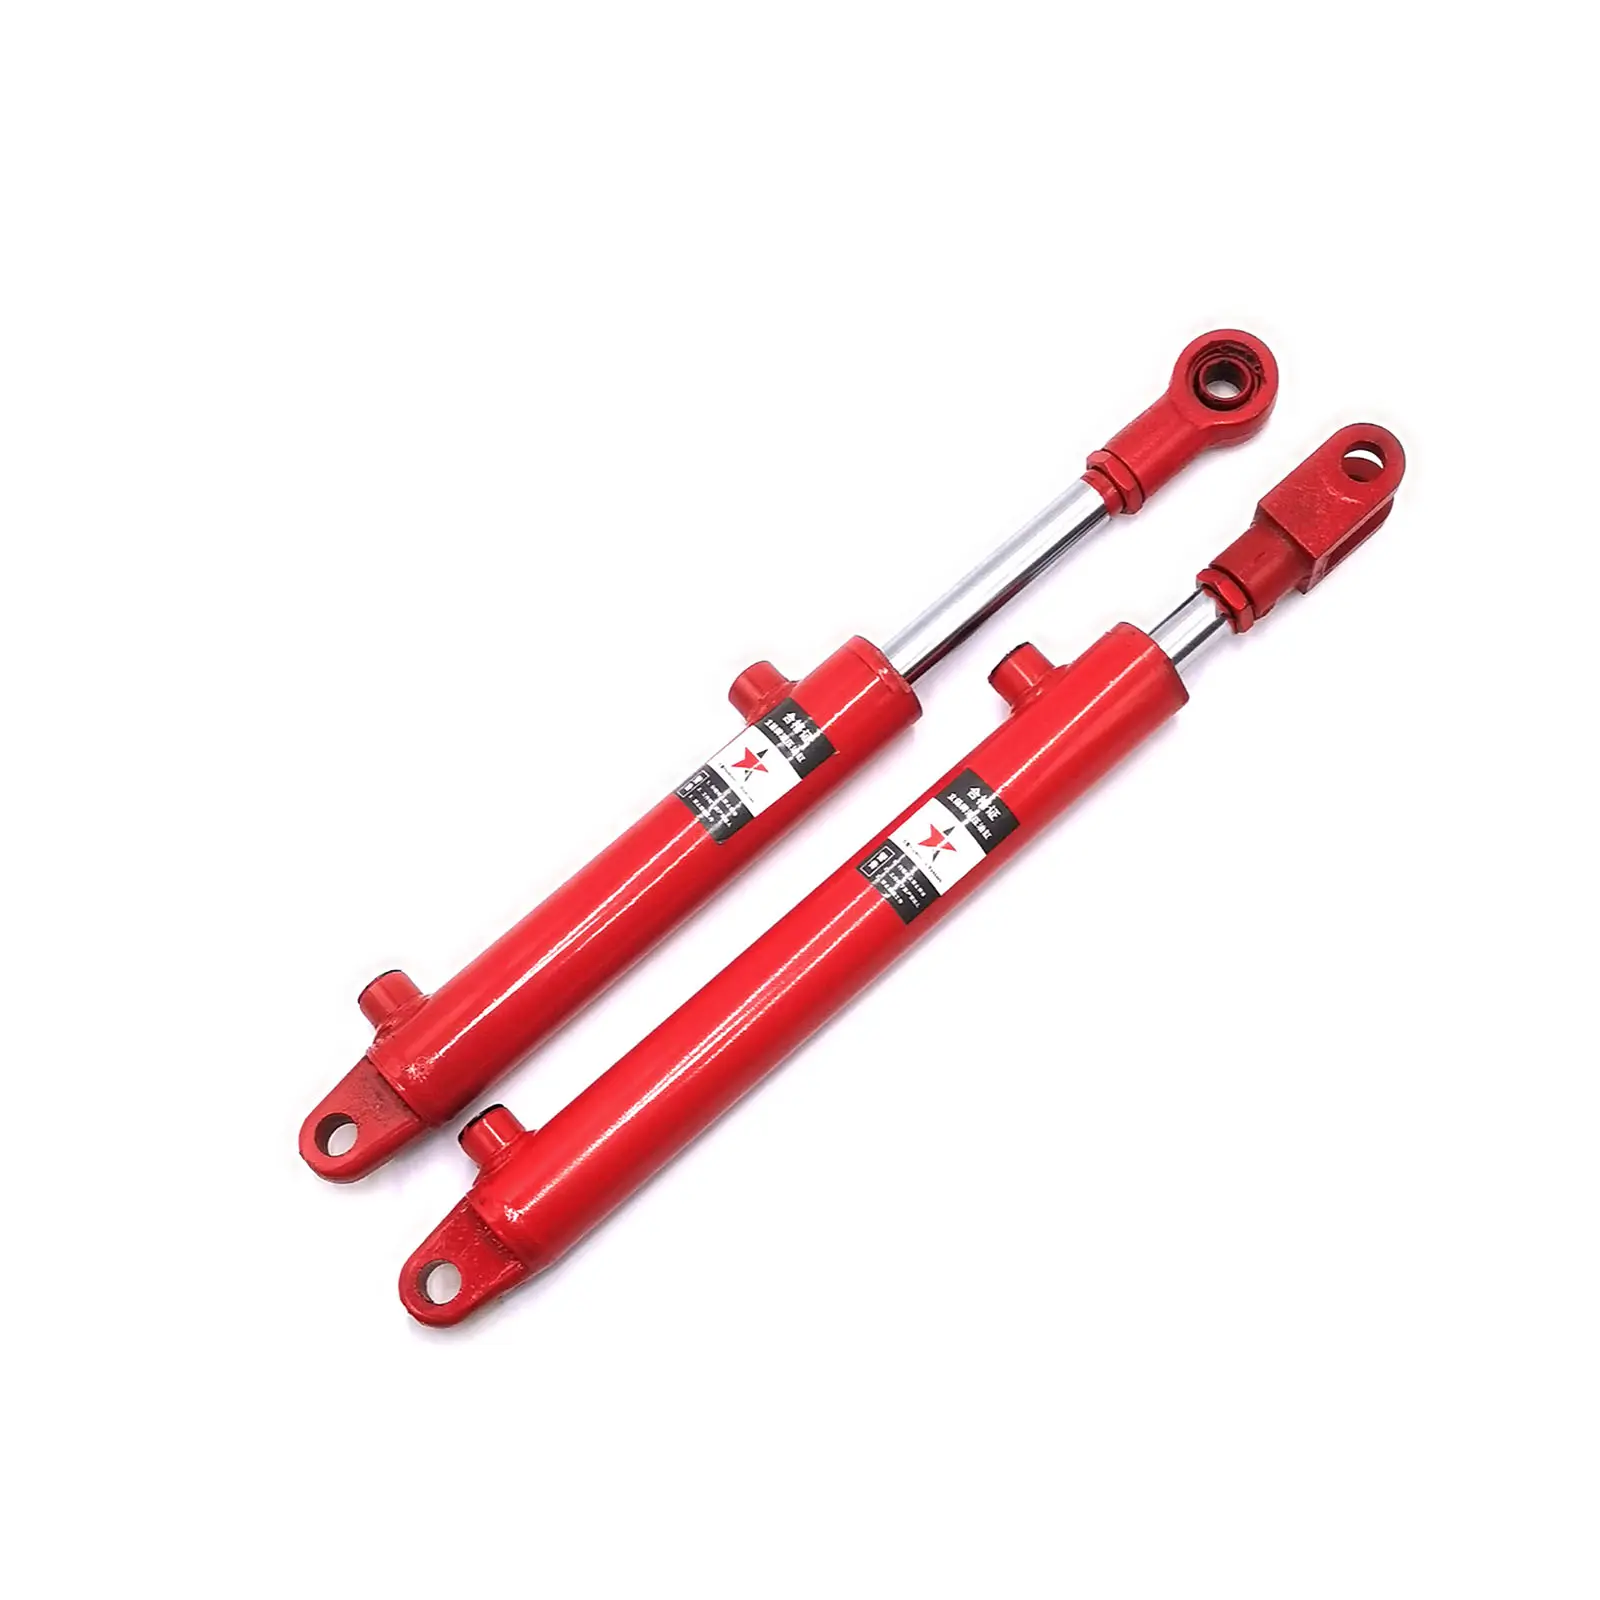 Hydraulic Cylinder Agriculture Machinery Parts Factory customized HSG hydraulic cylinder Double Acting Hydraulic Ram